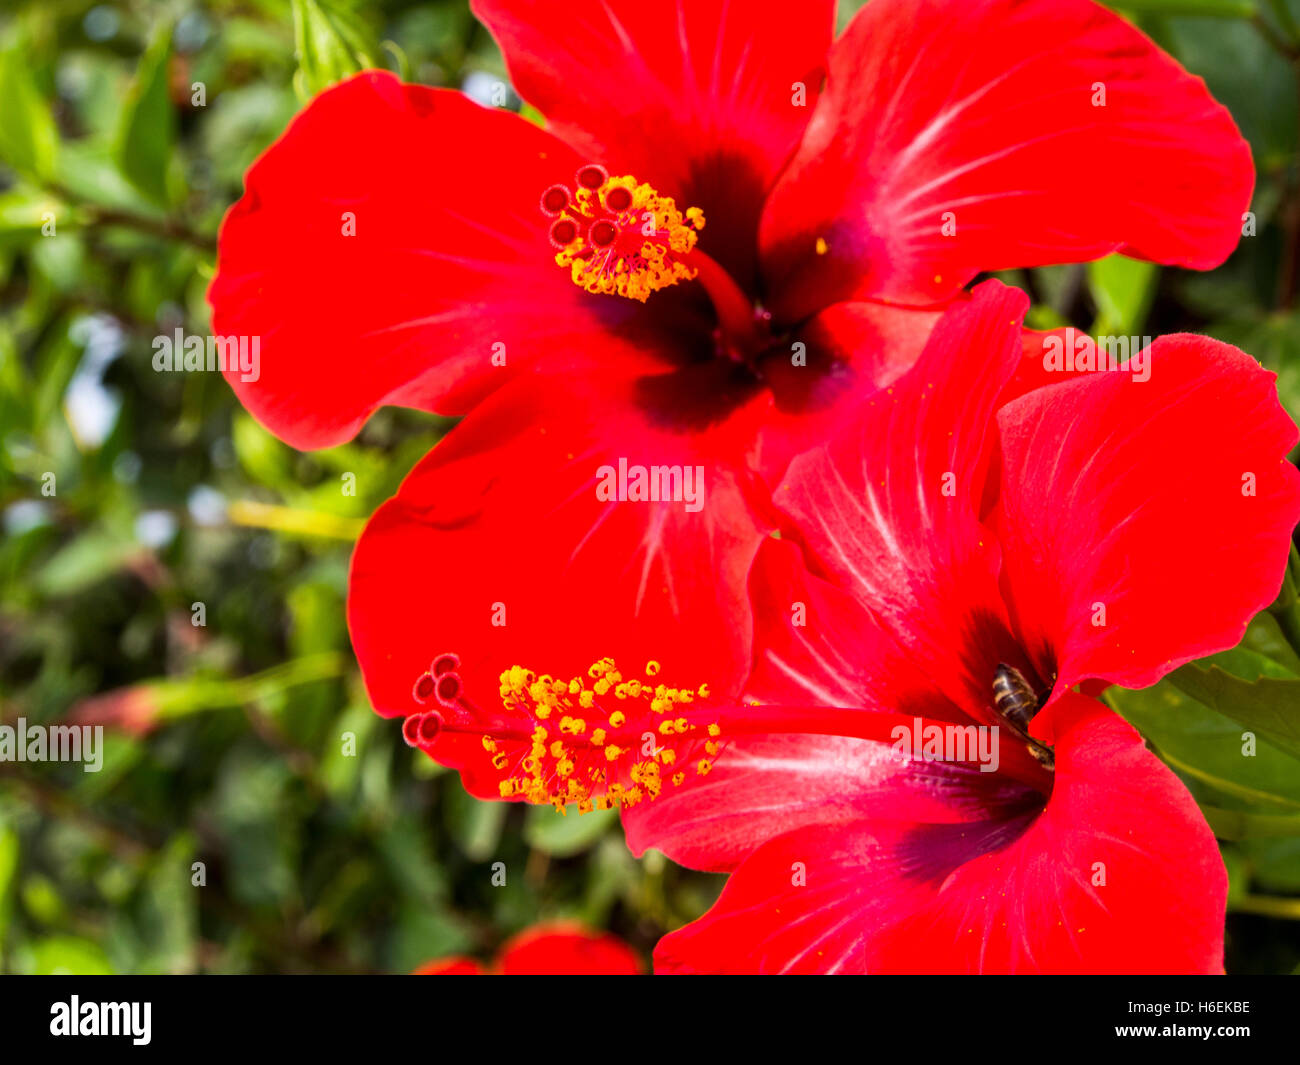 Red Hibiscus Flower in a garden. Mijas. Costa del Sol, Malaga province. Andalusia Spain. Europe Stock Photo